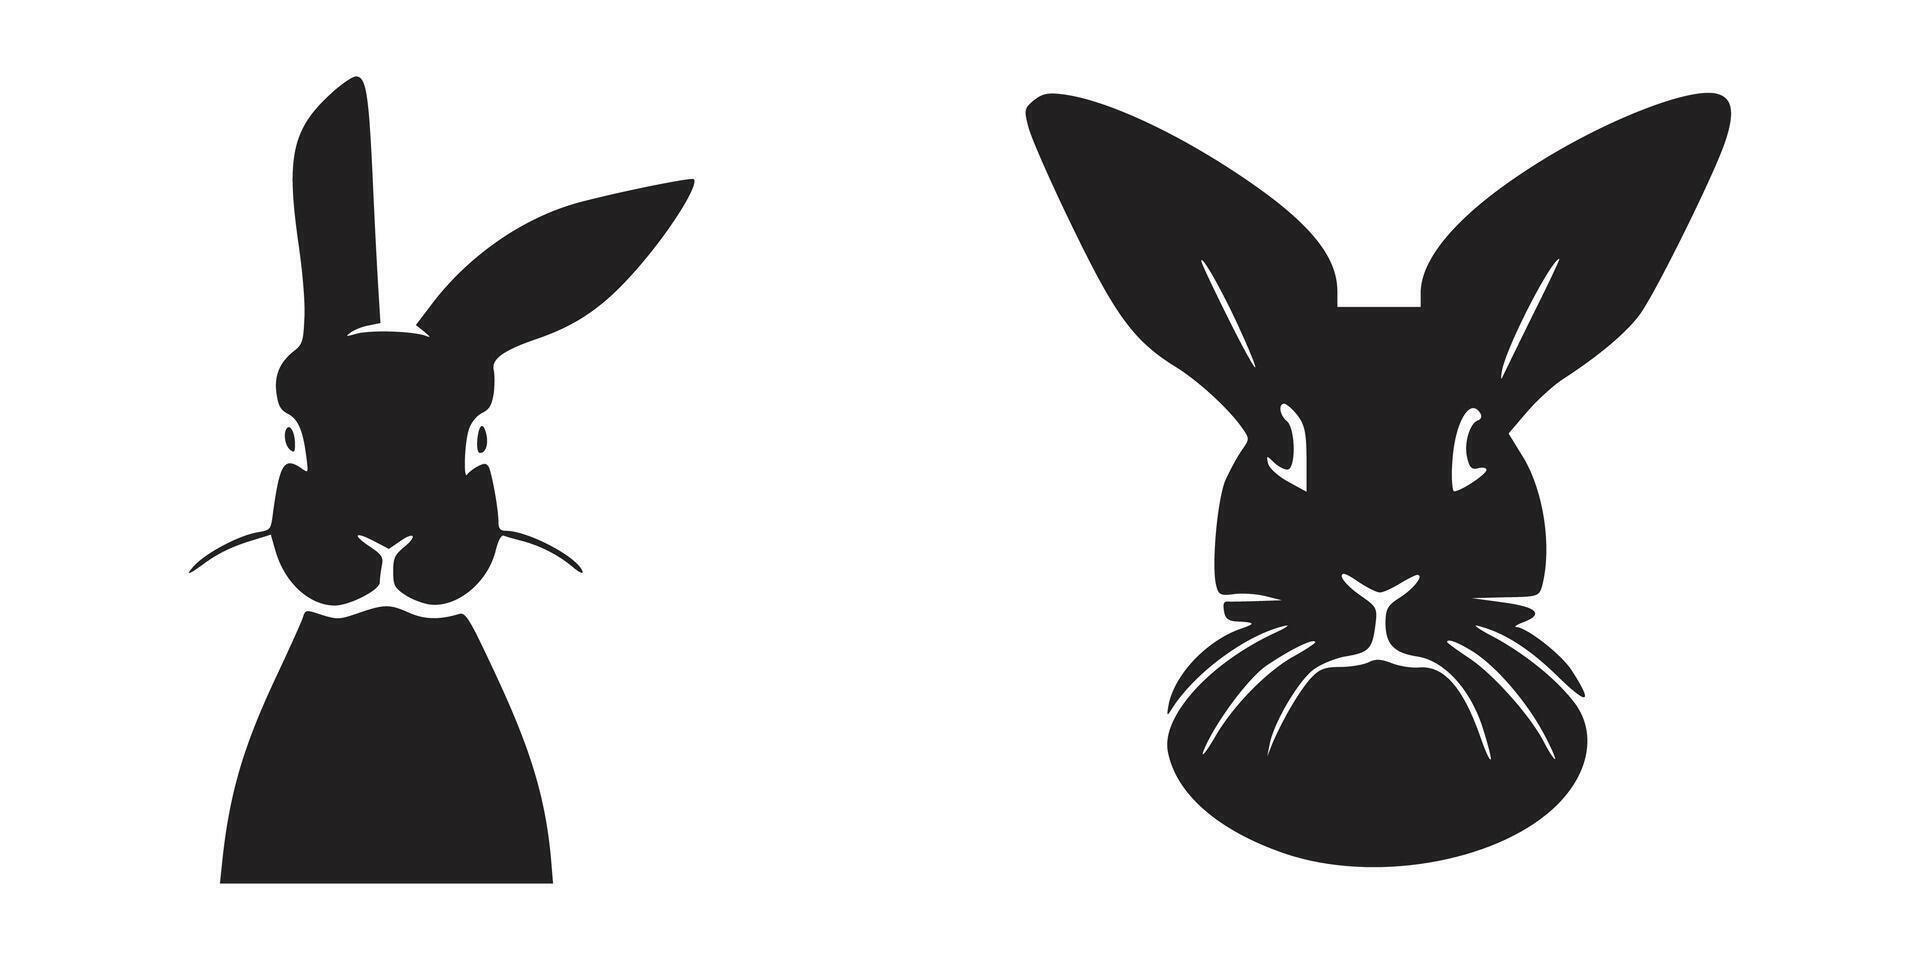 Rabbit Vector. Isolated rabbit shadow on a white background vector